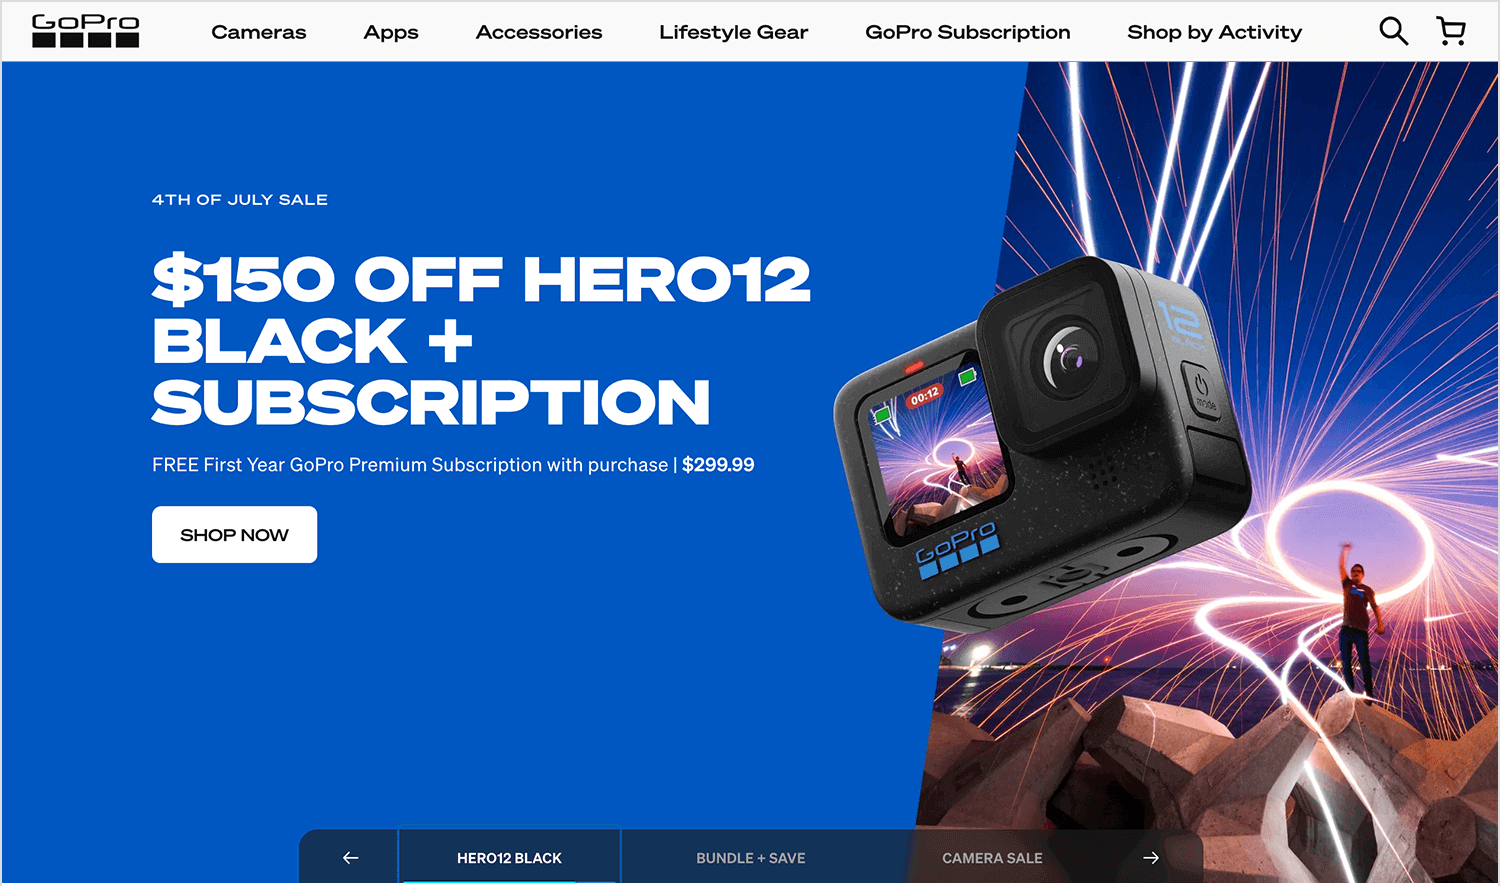 GoPro's hero image with HERO12 Black 4th of July sale with $150 off and subscription